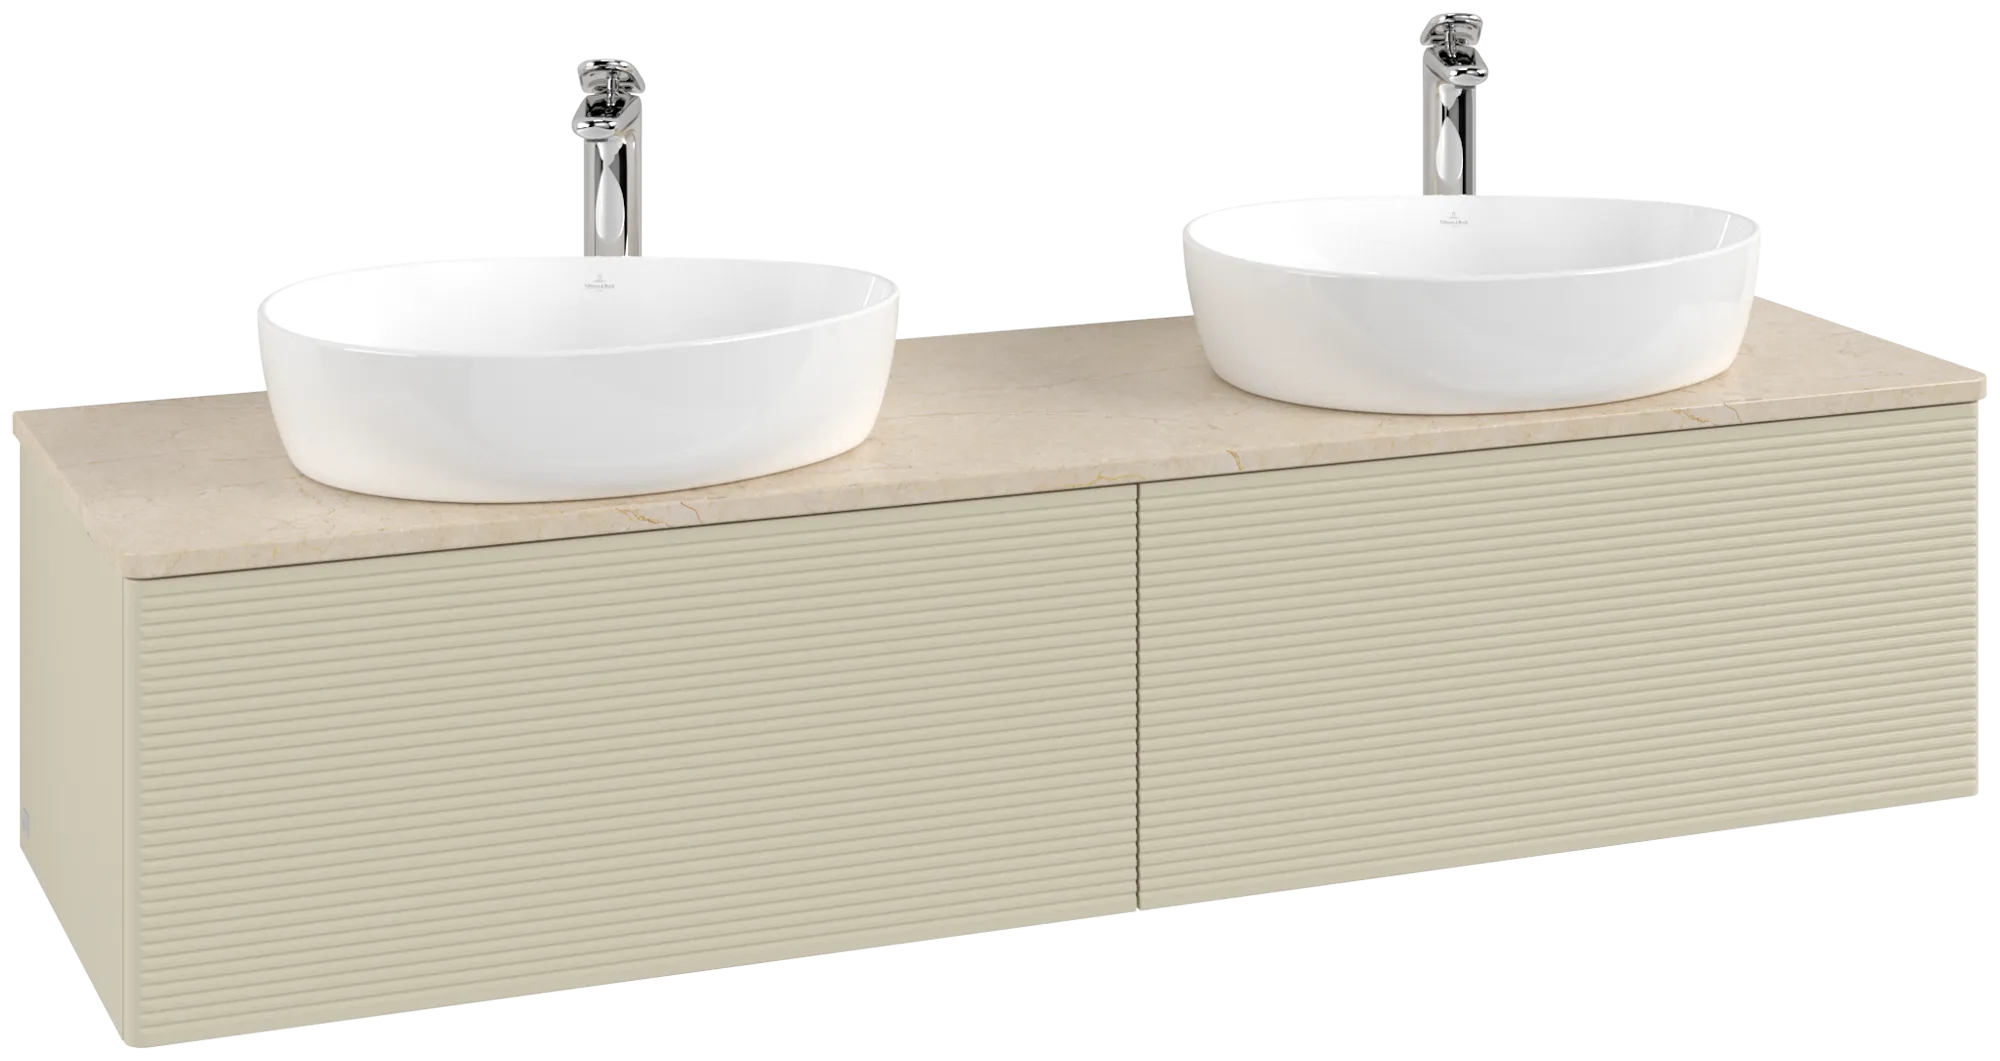 Obrázek VILLEROY BOCH Antao Vanity unit, 2 pull-out compartments, 1600 x 360 x 500 mm, Front with grain texture, Silk Grey Matt Lacquer / Botticino #K39153HJ